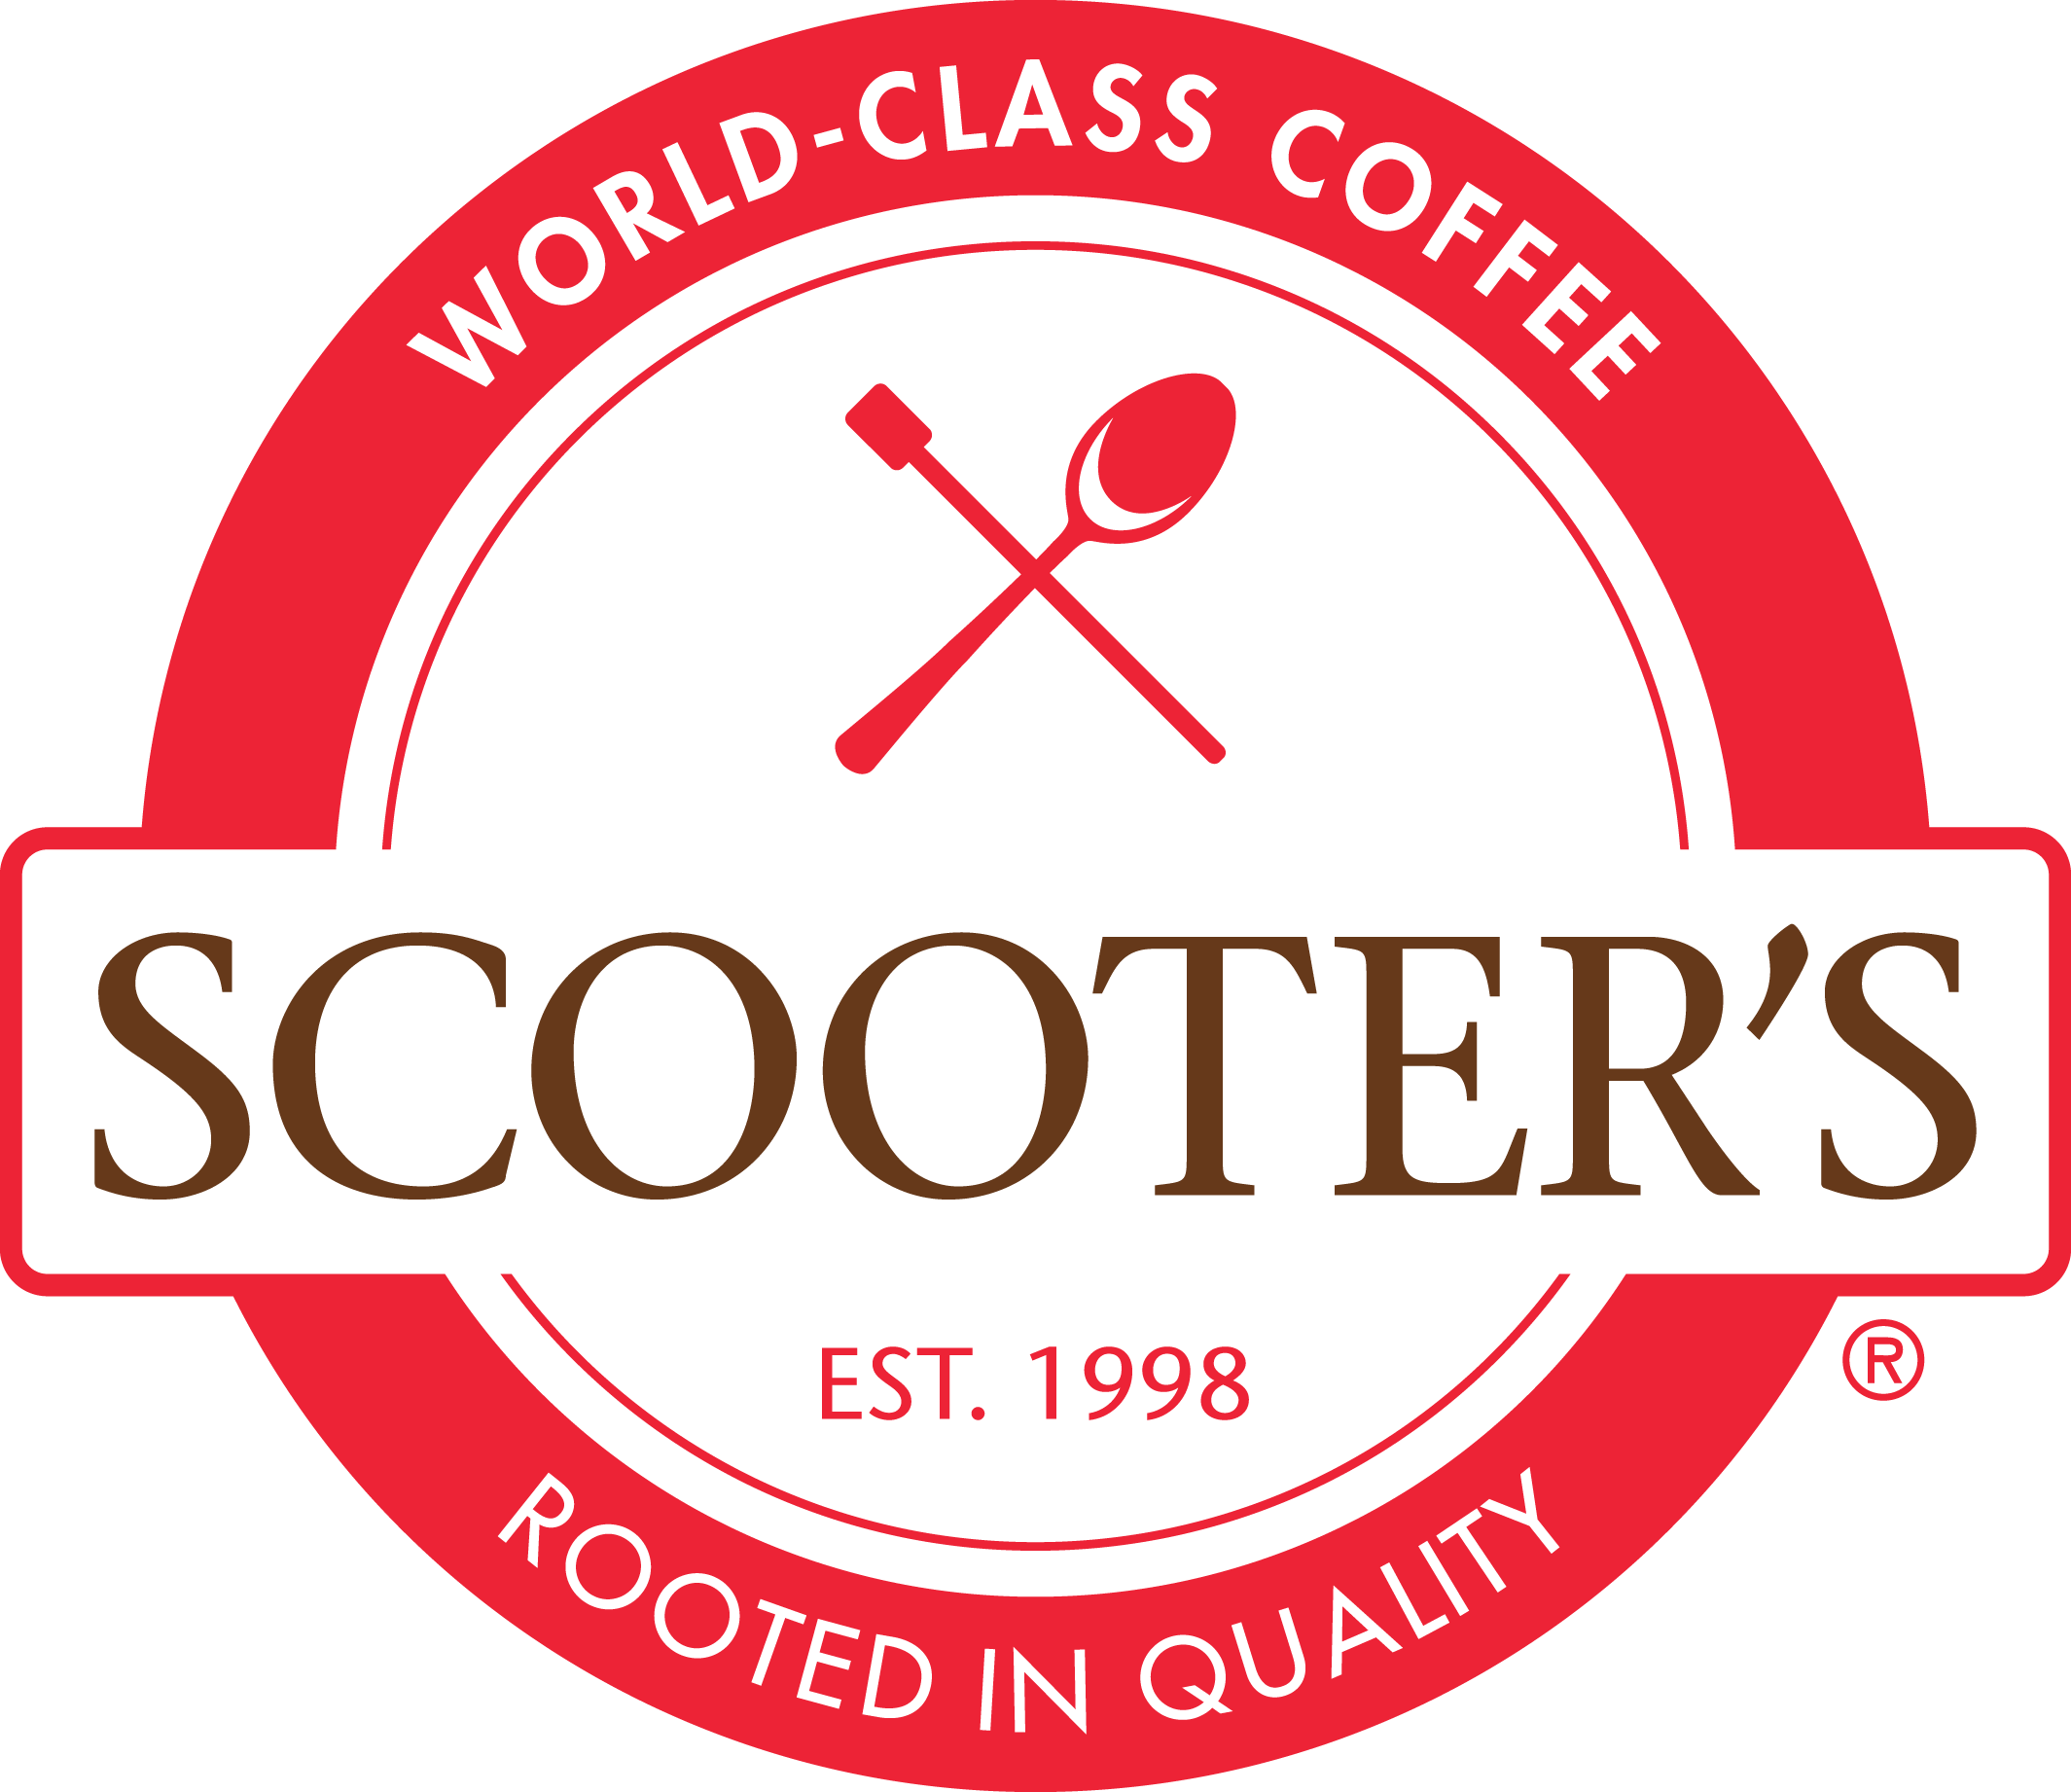 Scooter’s Coffee Expands Nebraska Locations Newest Location in North Platte Celebrates Grand Opening